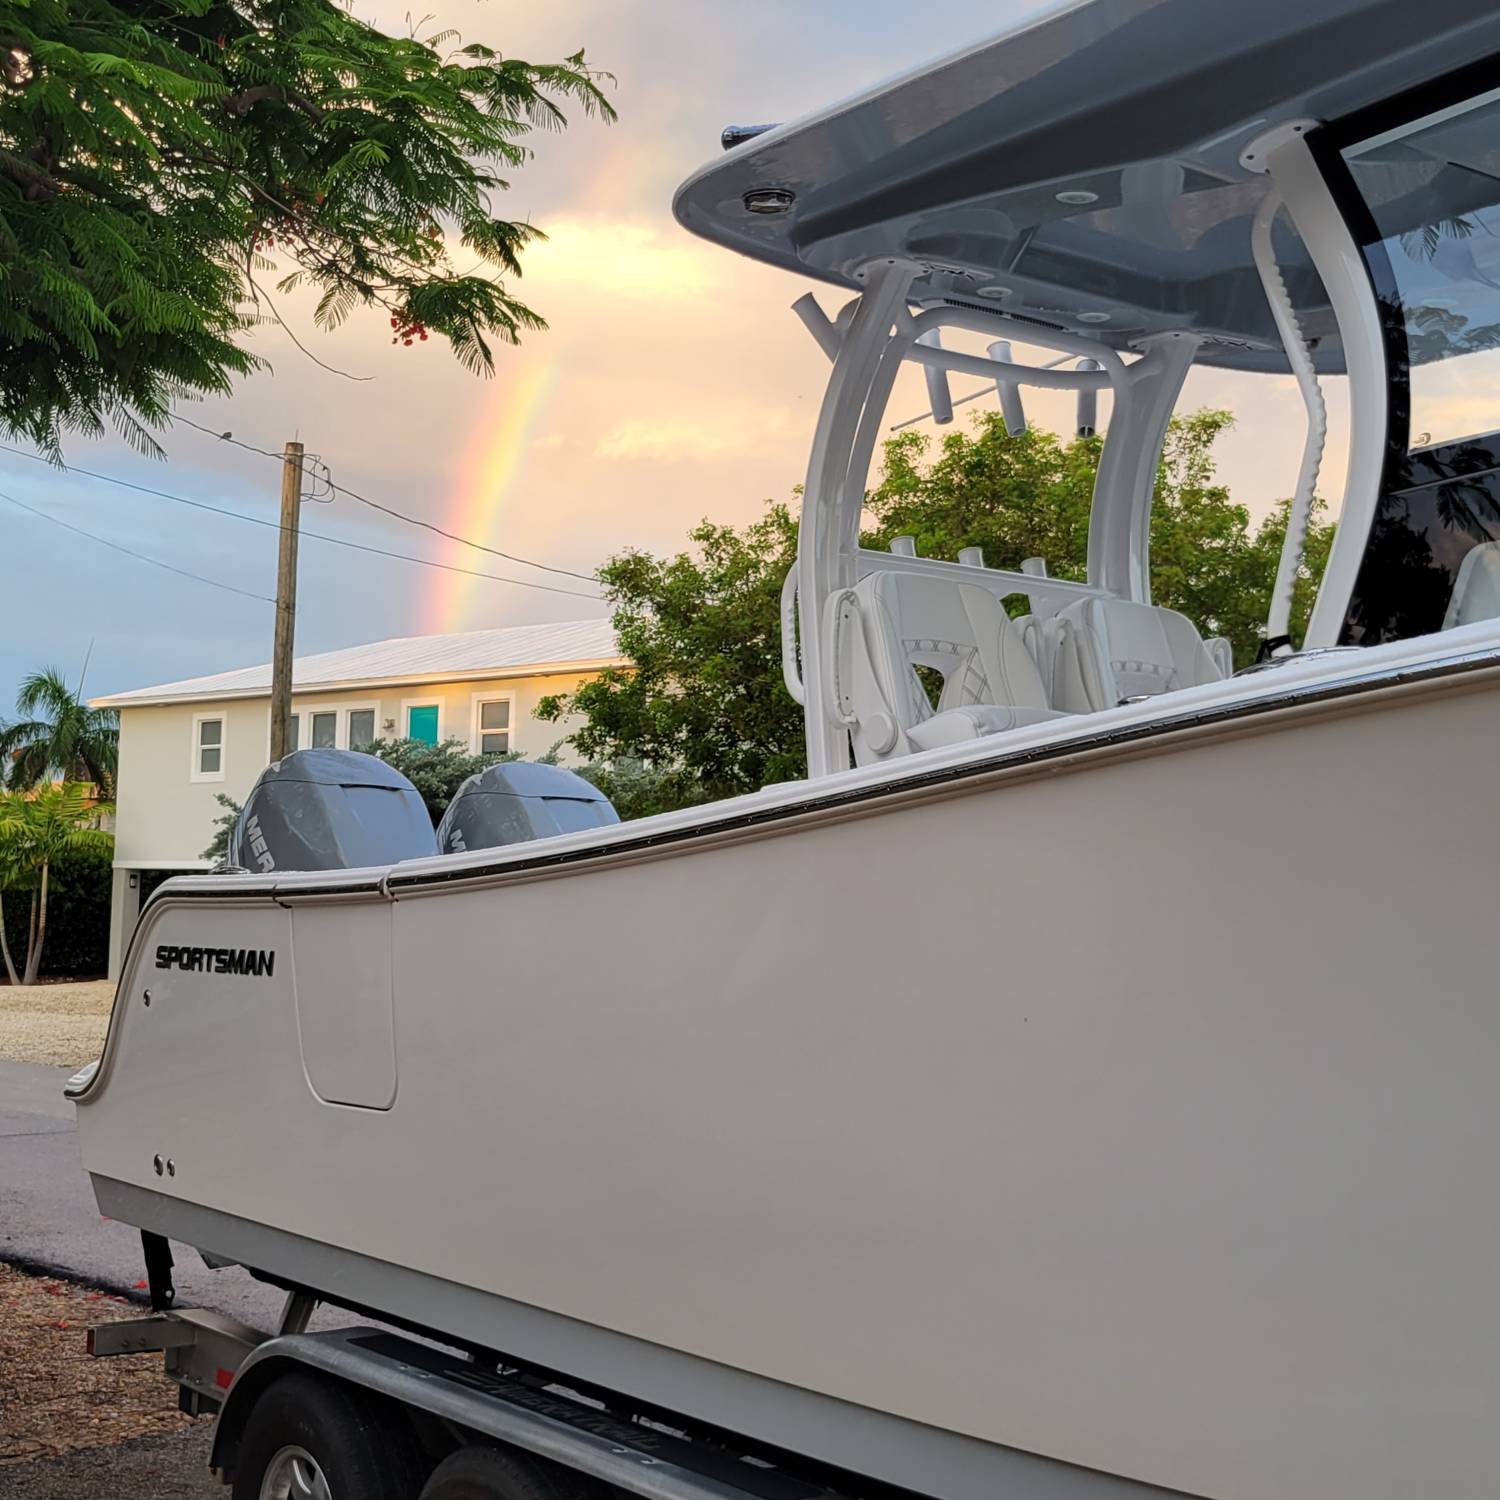 I was packing up the boat after our week long trip in the keys, and the rainbow shinning to the...